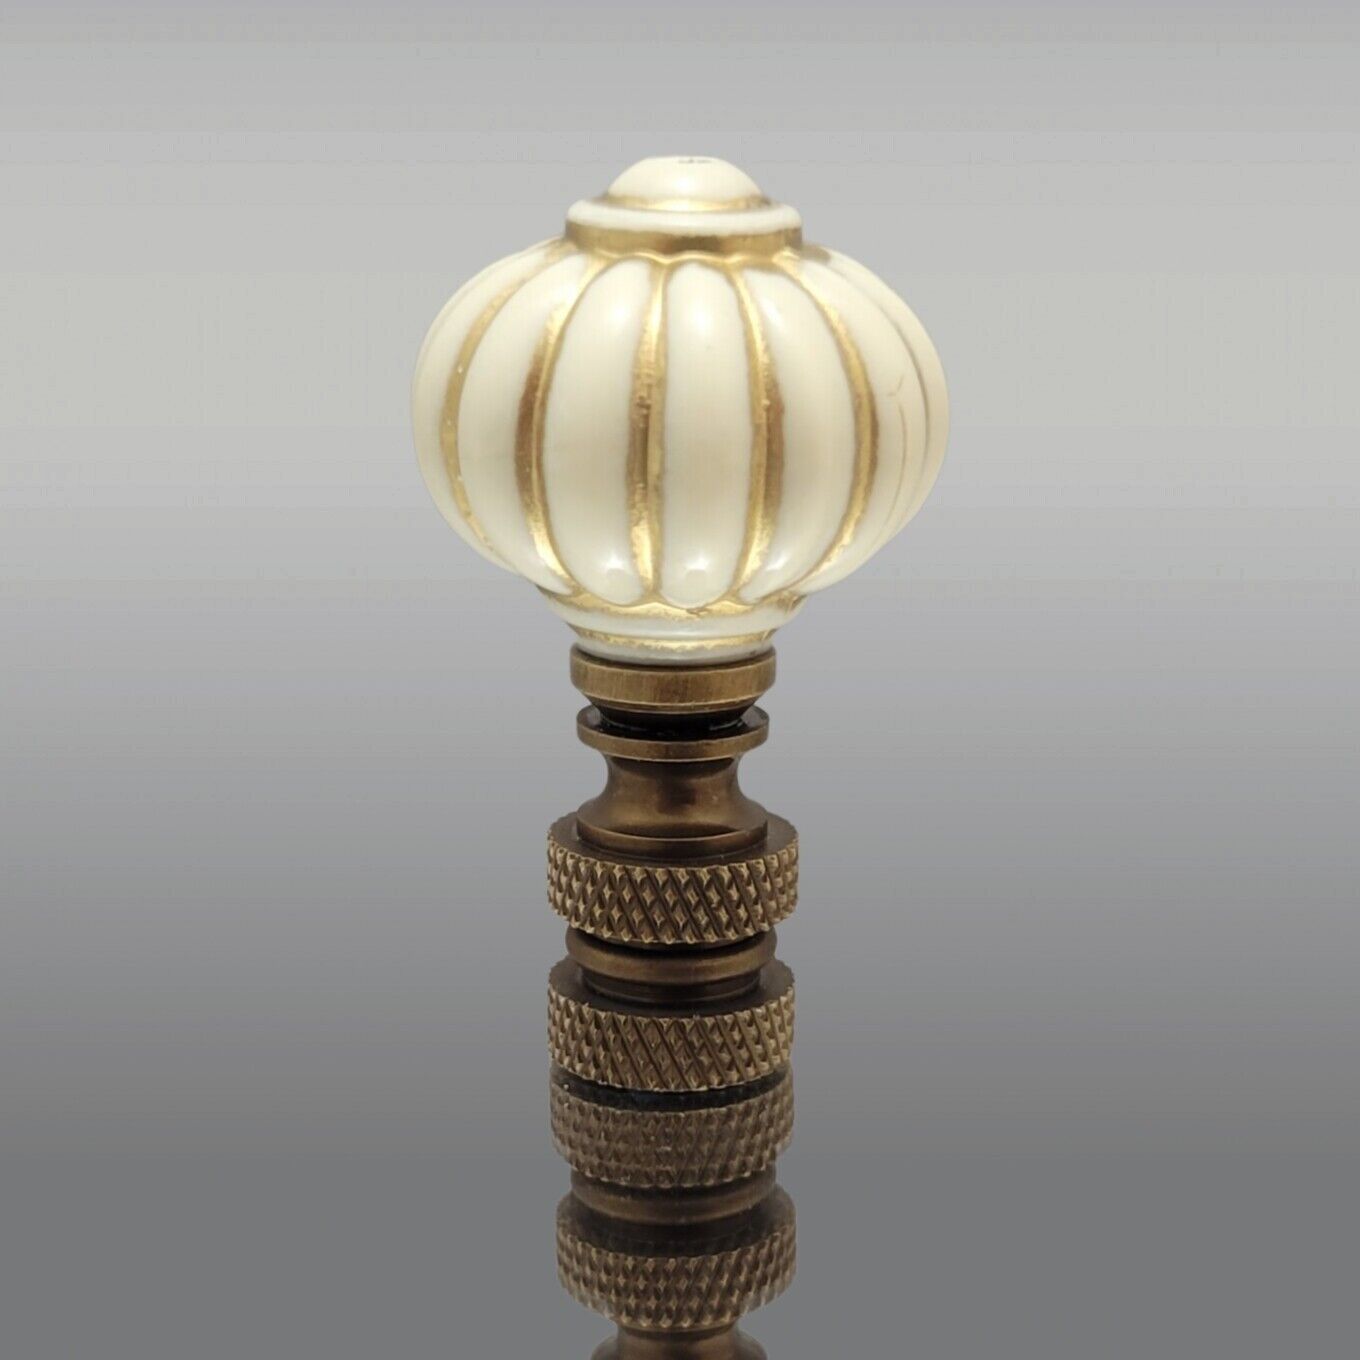 Ivory/Gold, Acrylic, Lenox Style Lamp Finials Polished or Antique Brass Bases